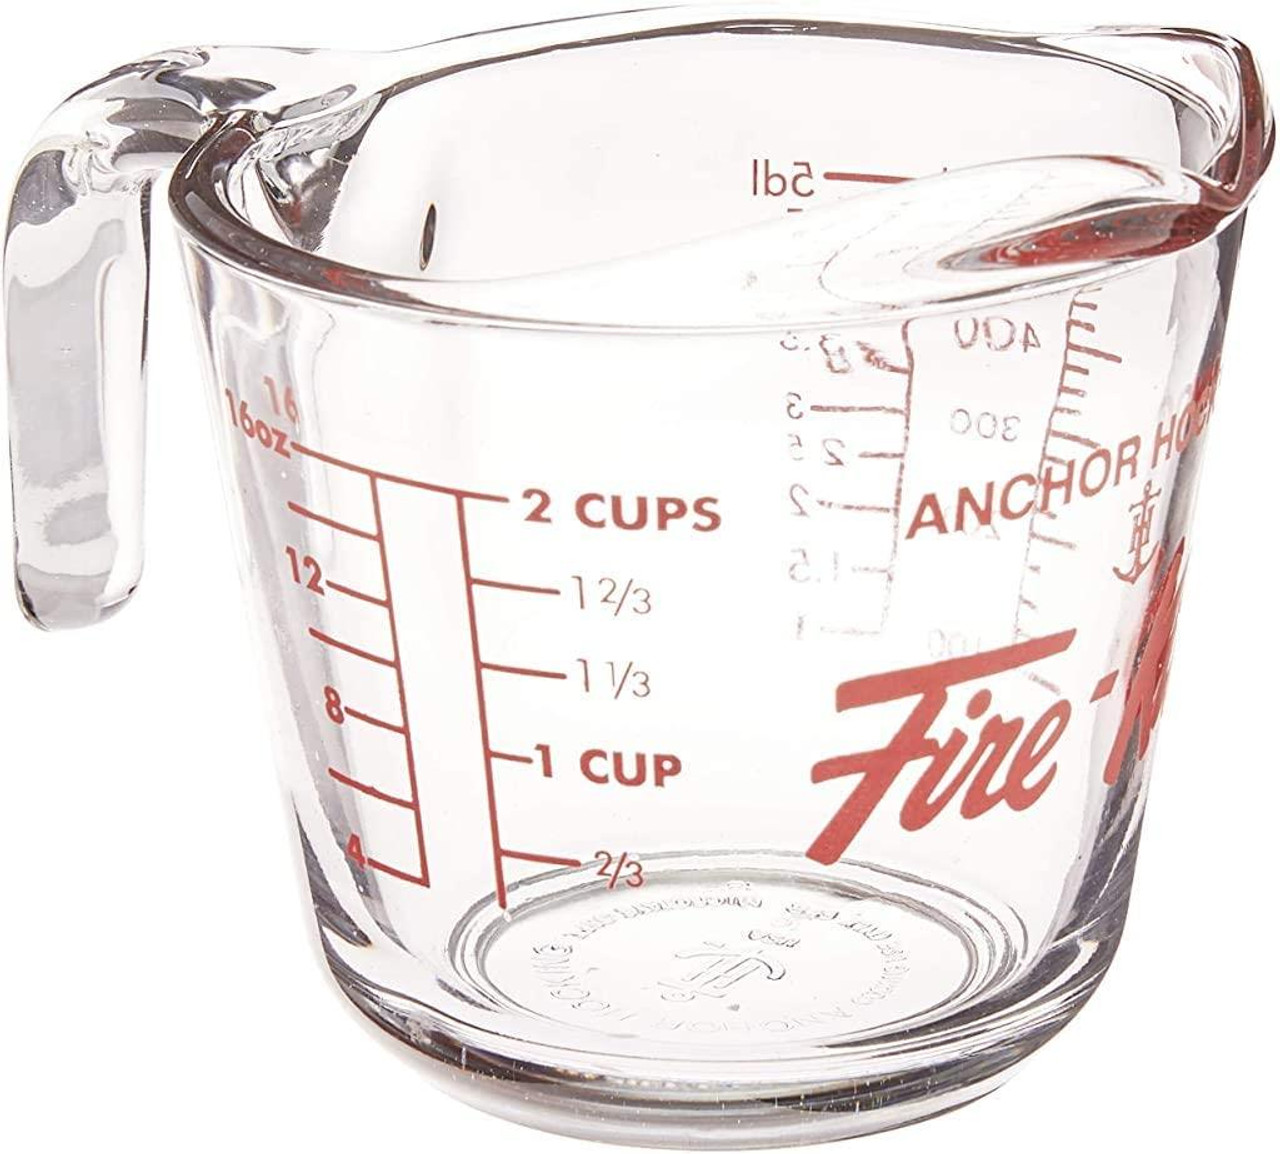 https://cdn11.bigcommerce.com/s-gemsyzzxez/images/stencil/1280x1280/products/5941/33824/2-Cup-Glass-Measuring-Cup-076440684513_image1__47046.1655753437.jpg?c=1